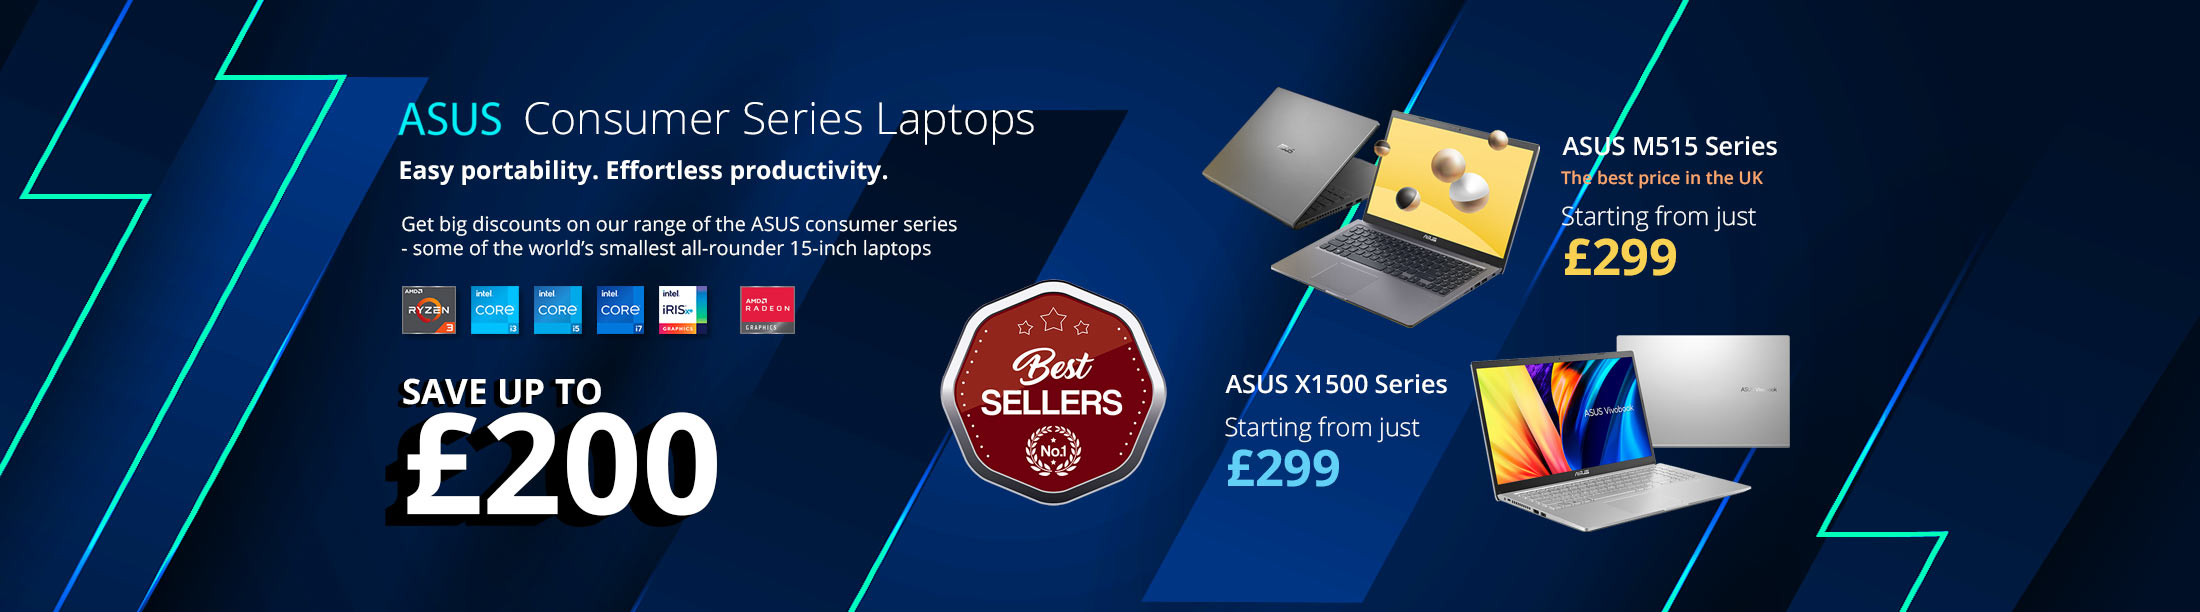 ASUS 515 Consumer Series Laptops- Easy portability. Effortless productivity.